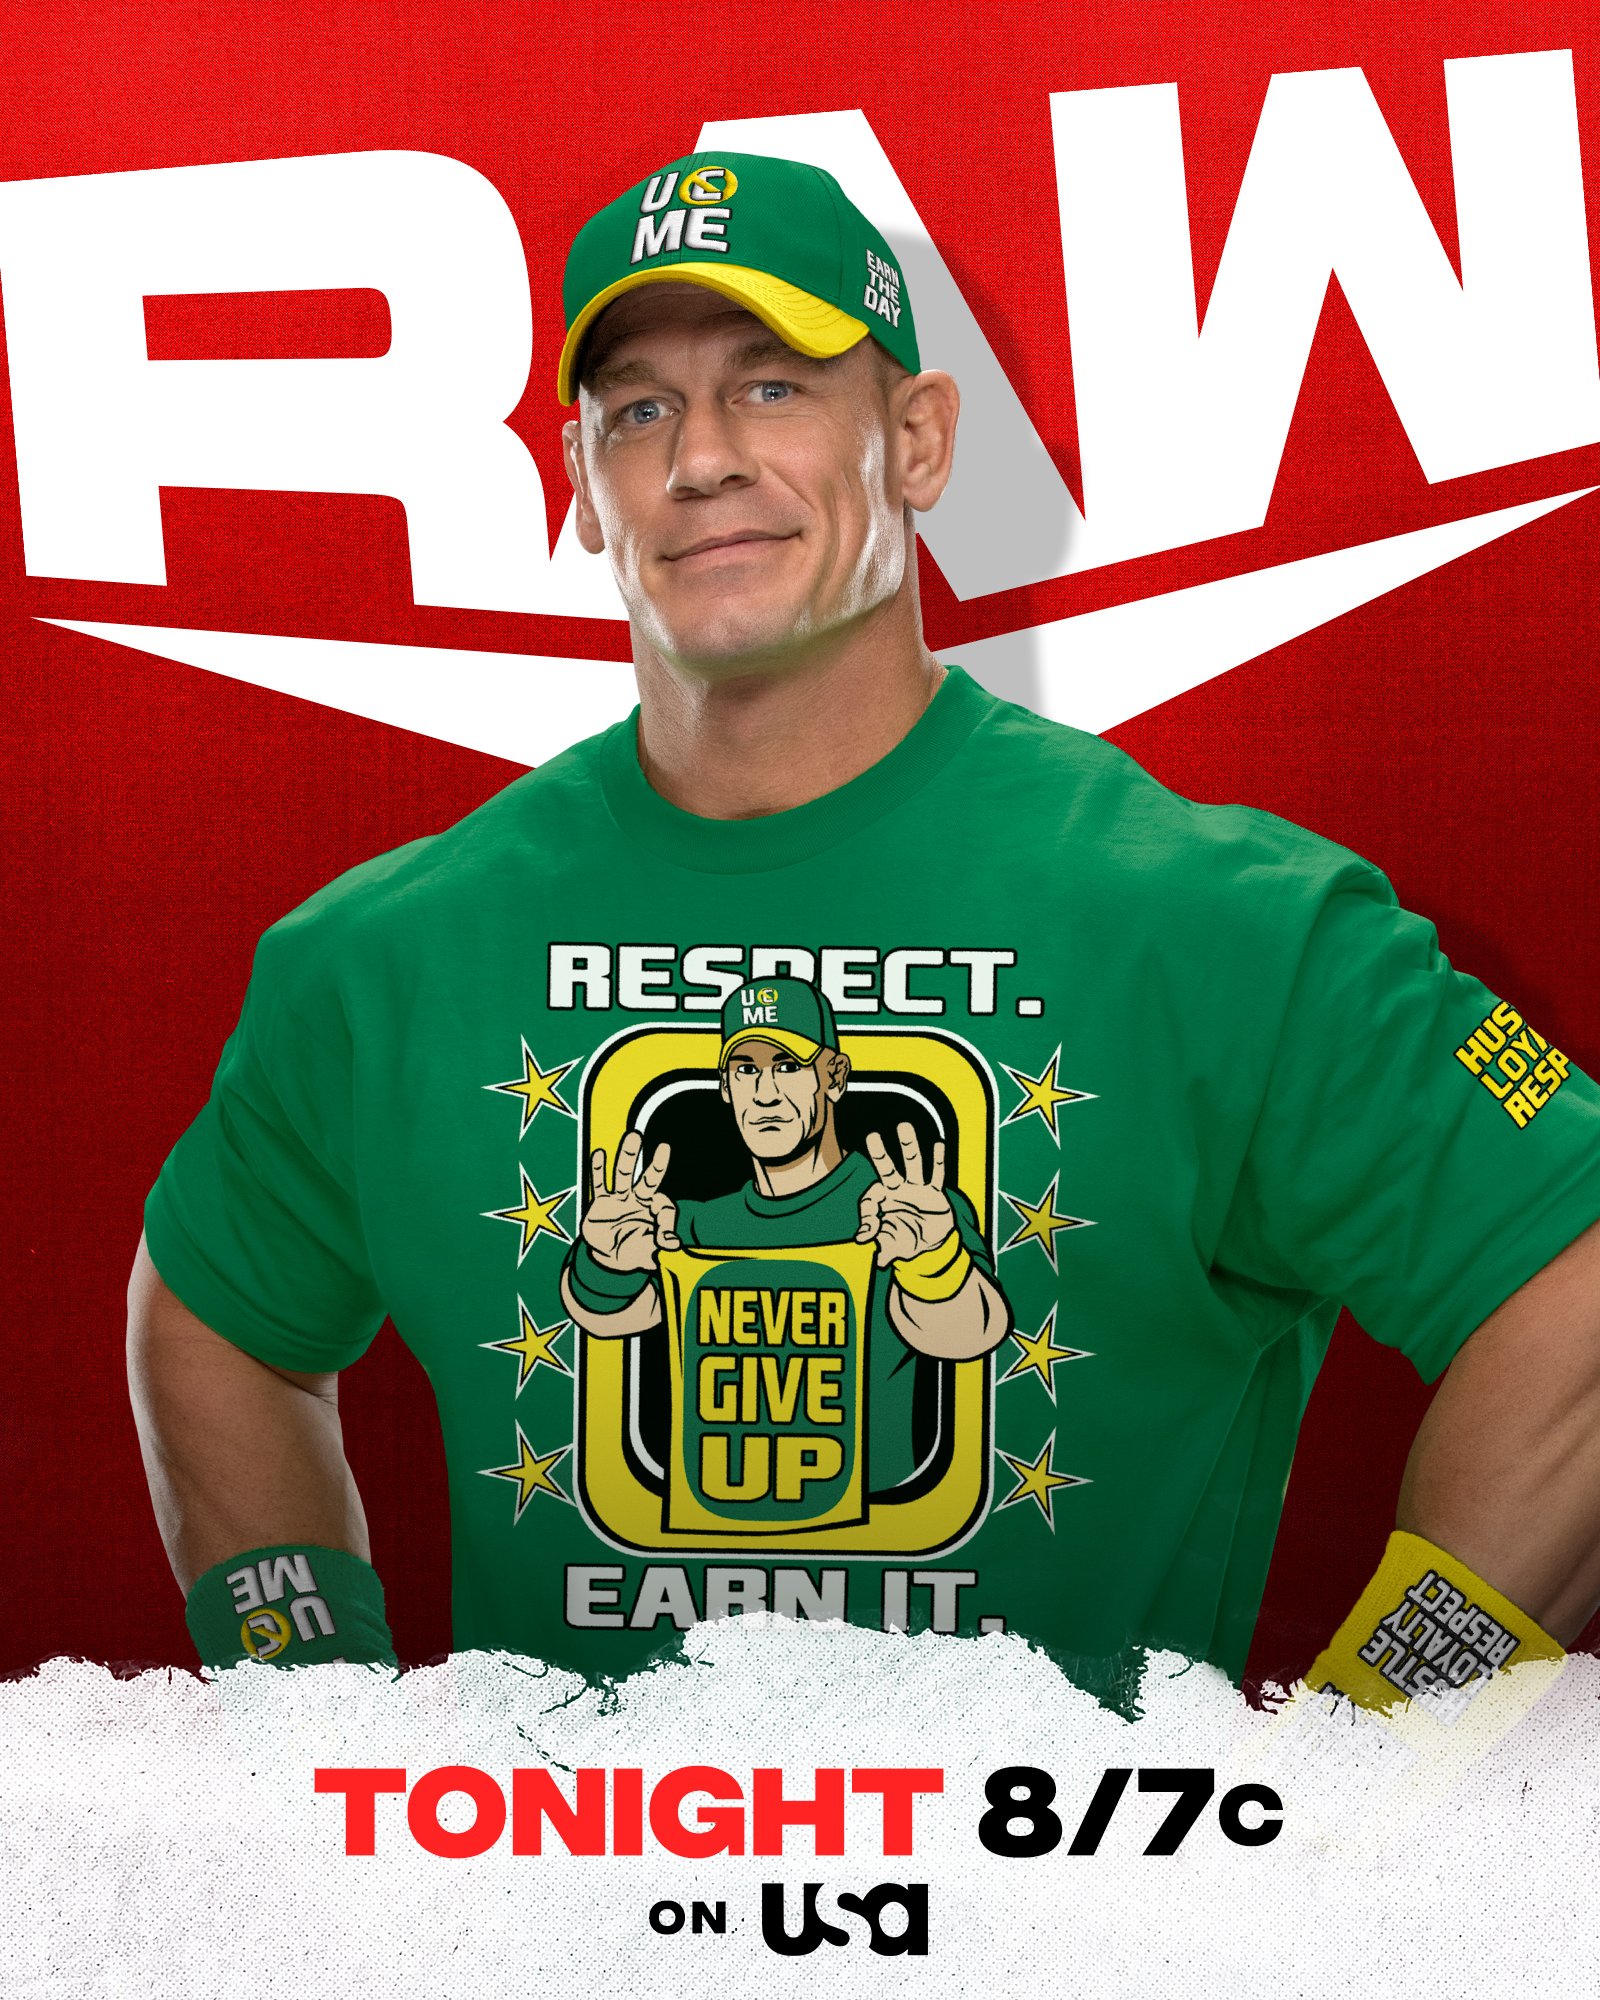 WWE Releases New John Cena Merchandise, The New Day's Latest Podcast